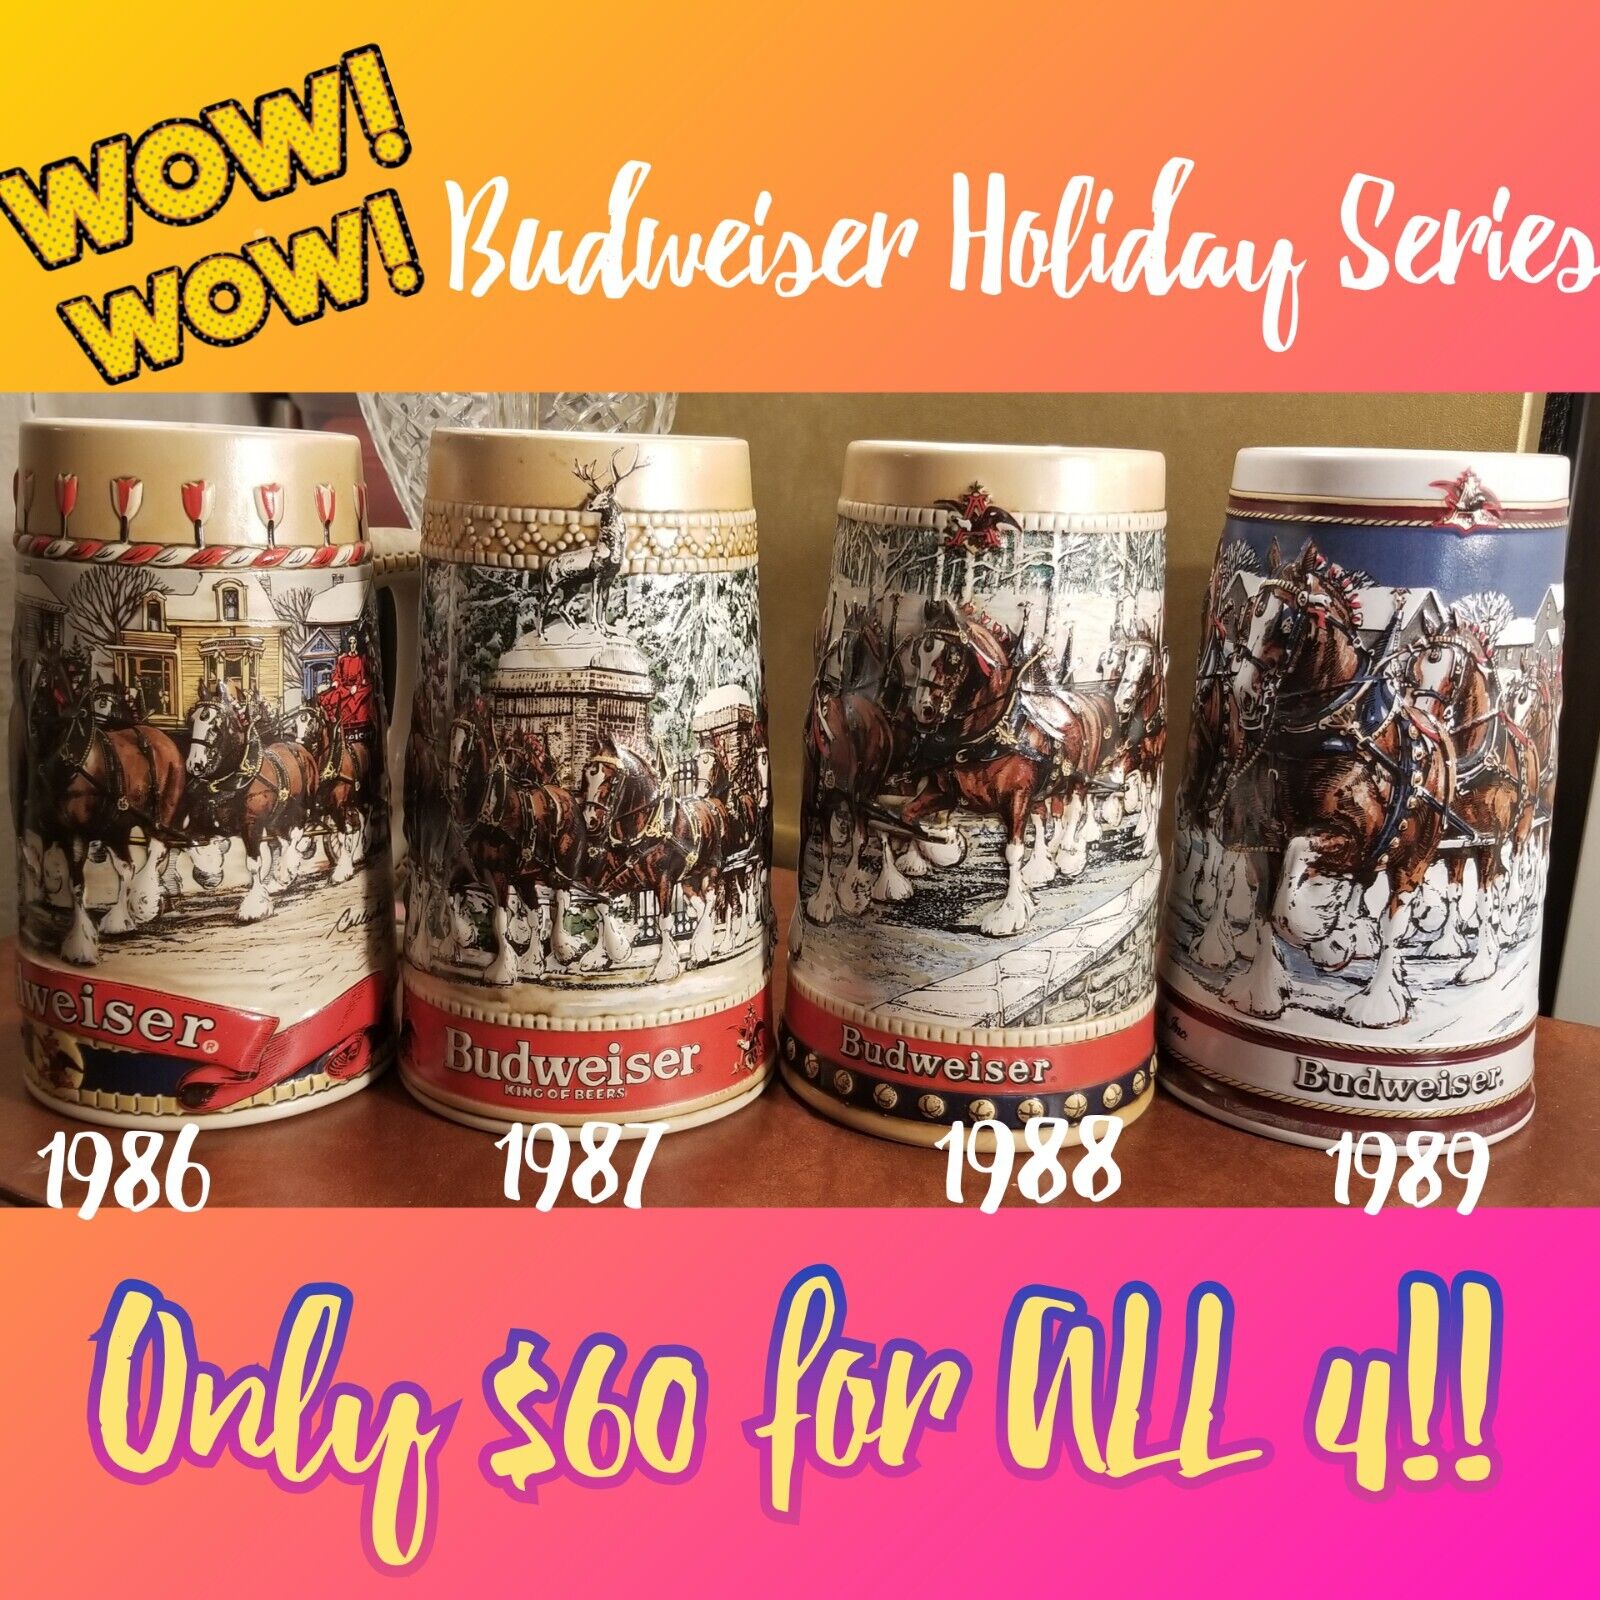 SPECIAL: BUDWEISER HOLIDAY SERIES 1986-1989 SET OF (4) - Reduced